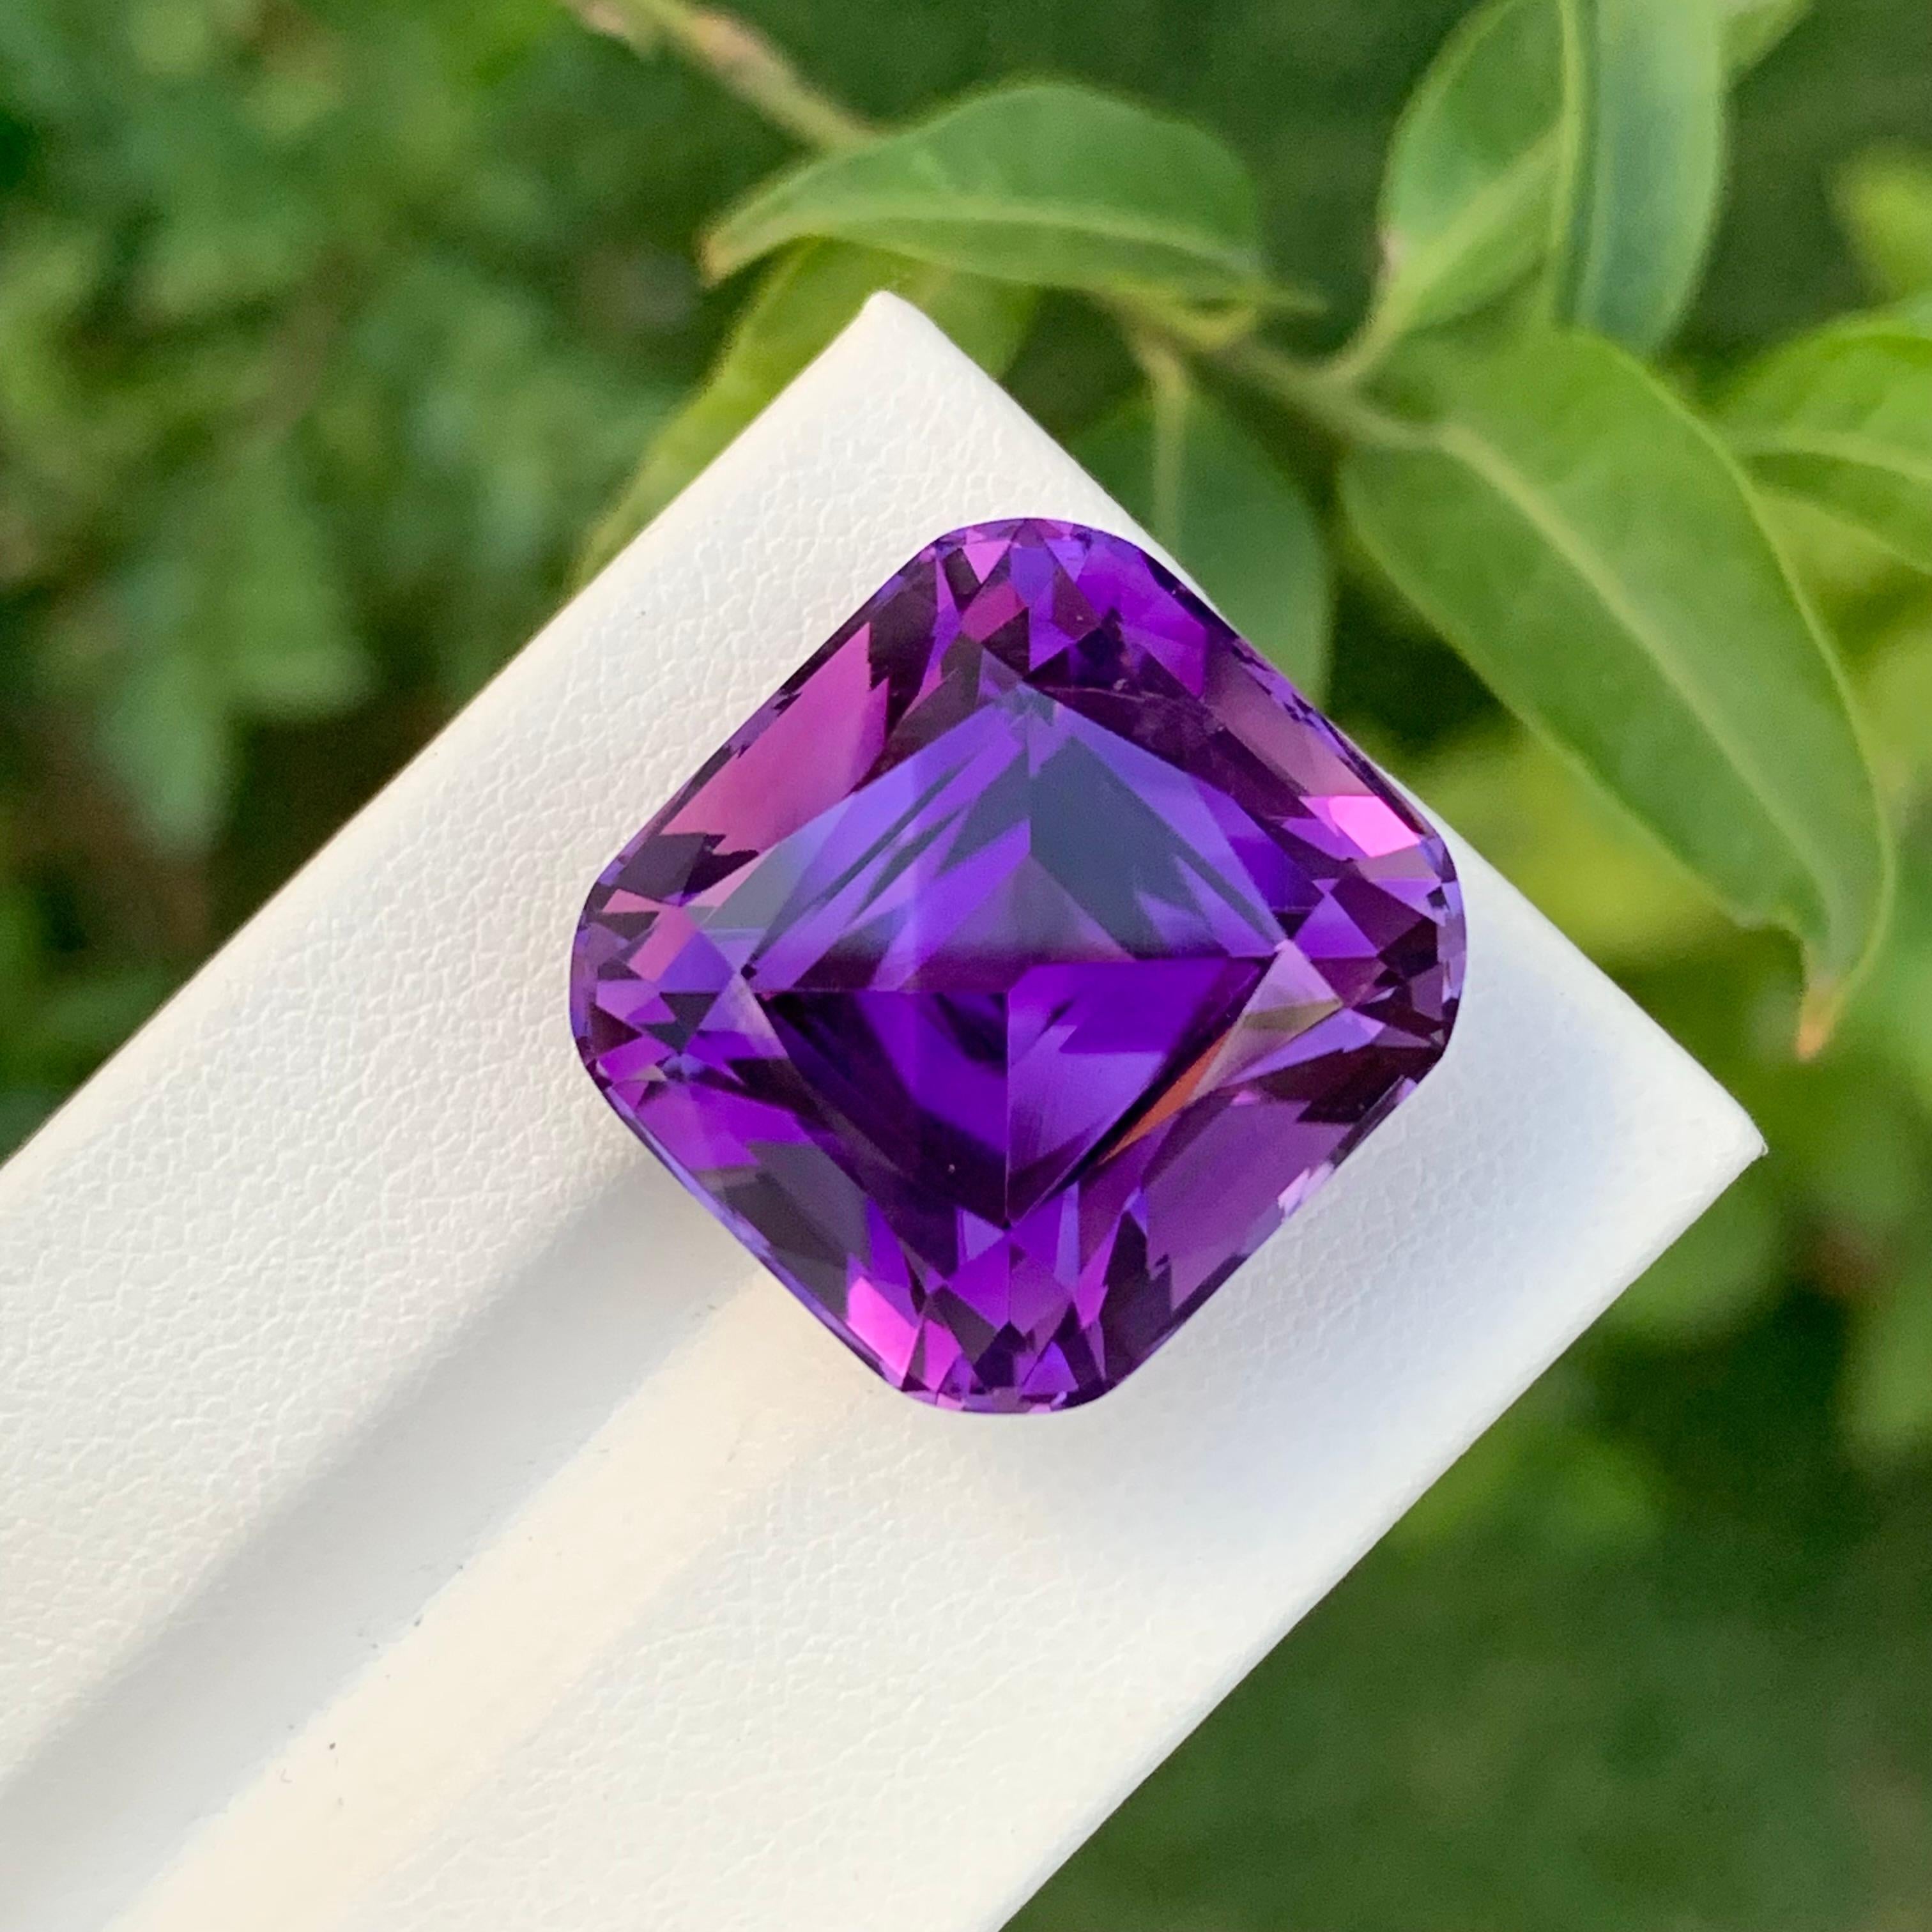 Loose Amethyst
Weight: 38.90 Carats
Dimension: 20 x 19 x 15.7 Mm
Colour: Purple
Origin: Brazil
Treatment: Non
Certificate: On Demand
Shape: Cushion

Amethyst, a stunning variety of quartz known for its mesmerizing purple hue, has captivated humans